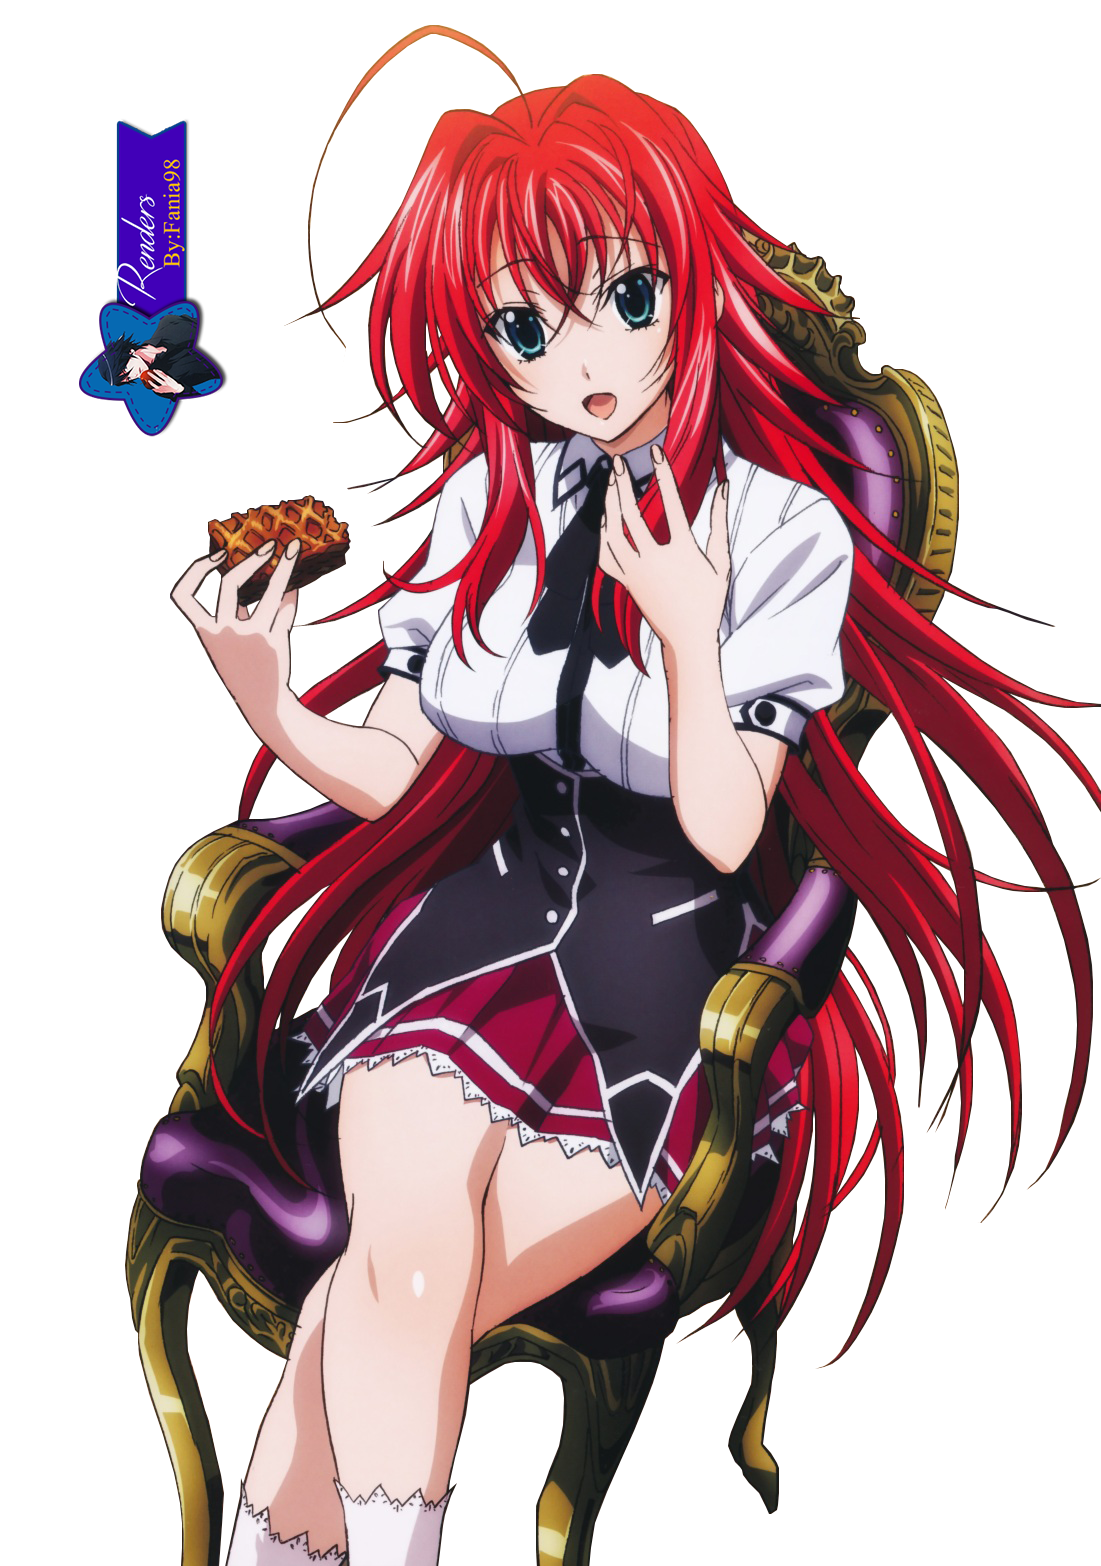 Rias Gremory by me : AnimeART